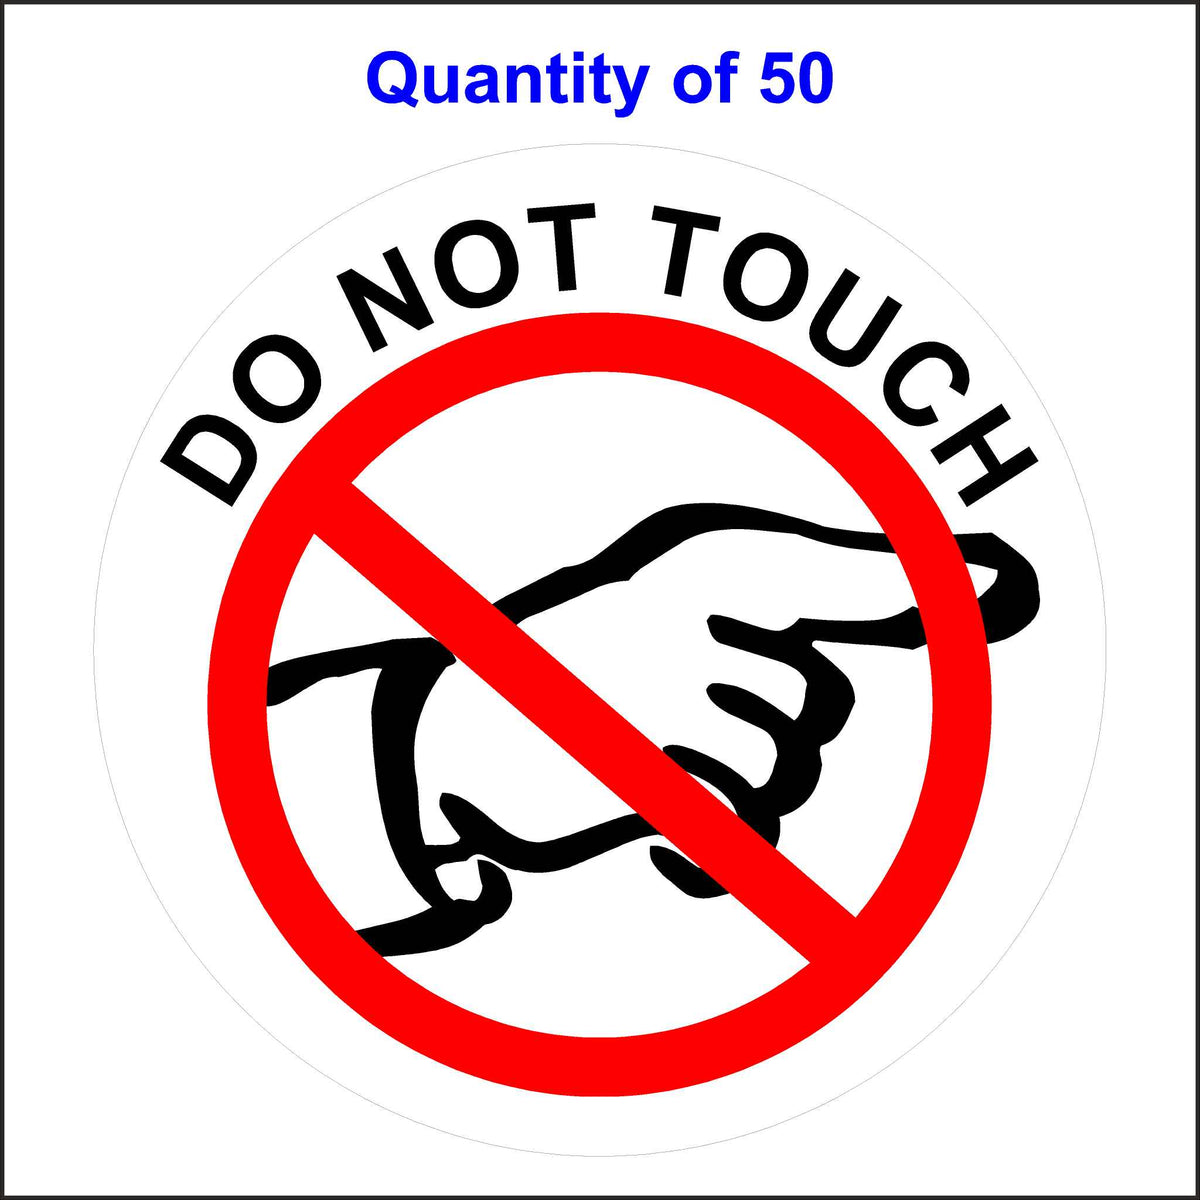 Do Not Touch Sticker With Finger Pointing. 50 Quantity.